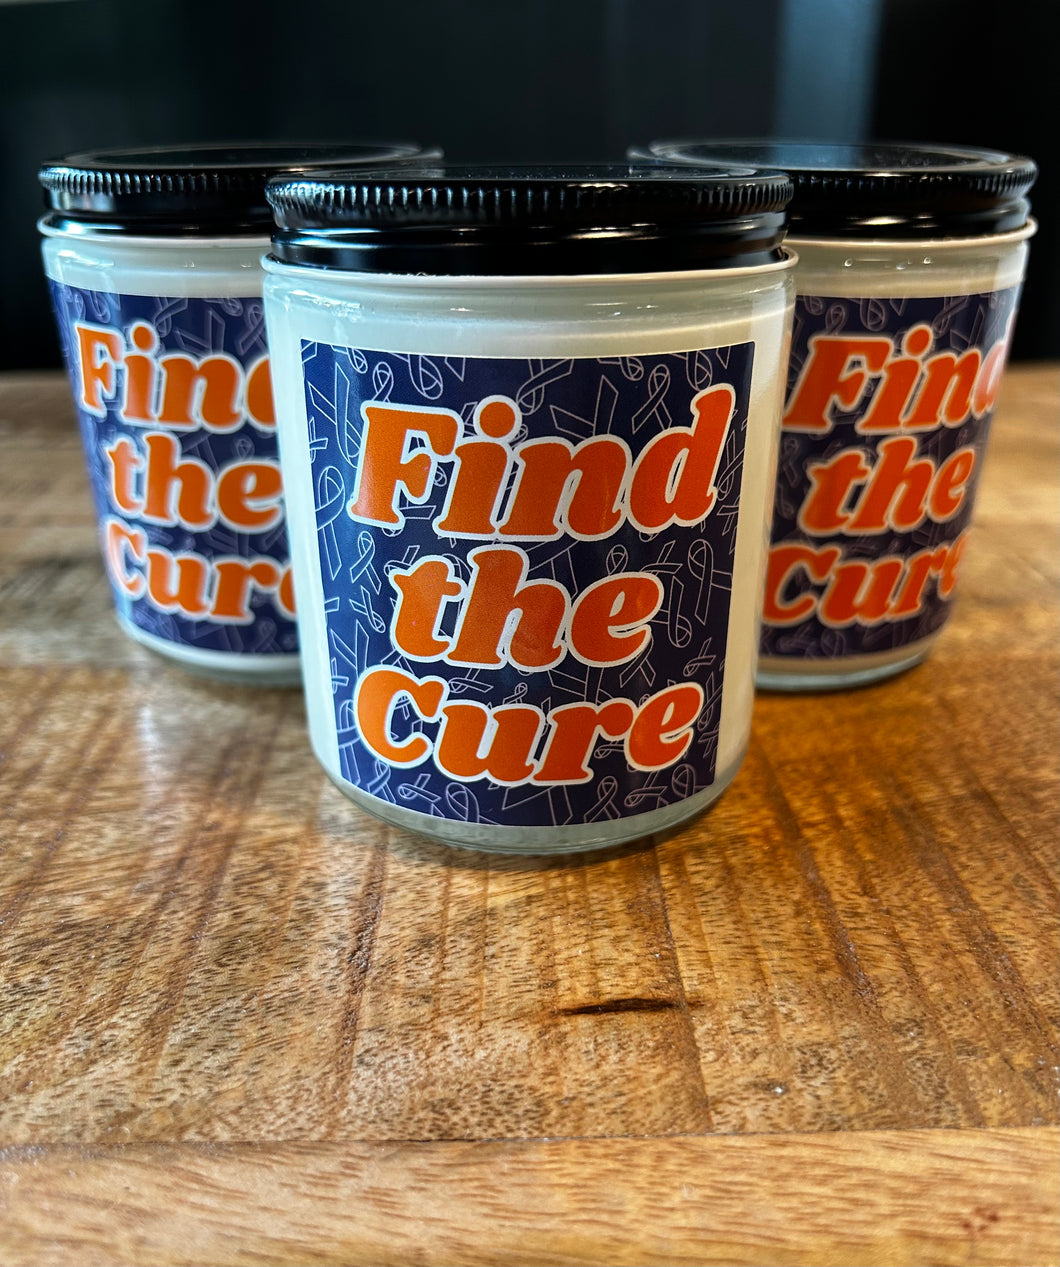 Find the Cure